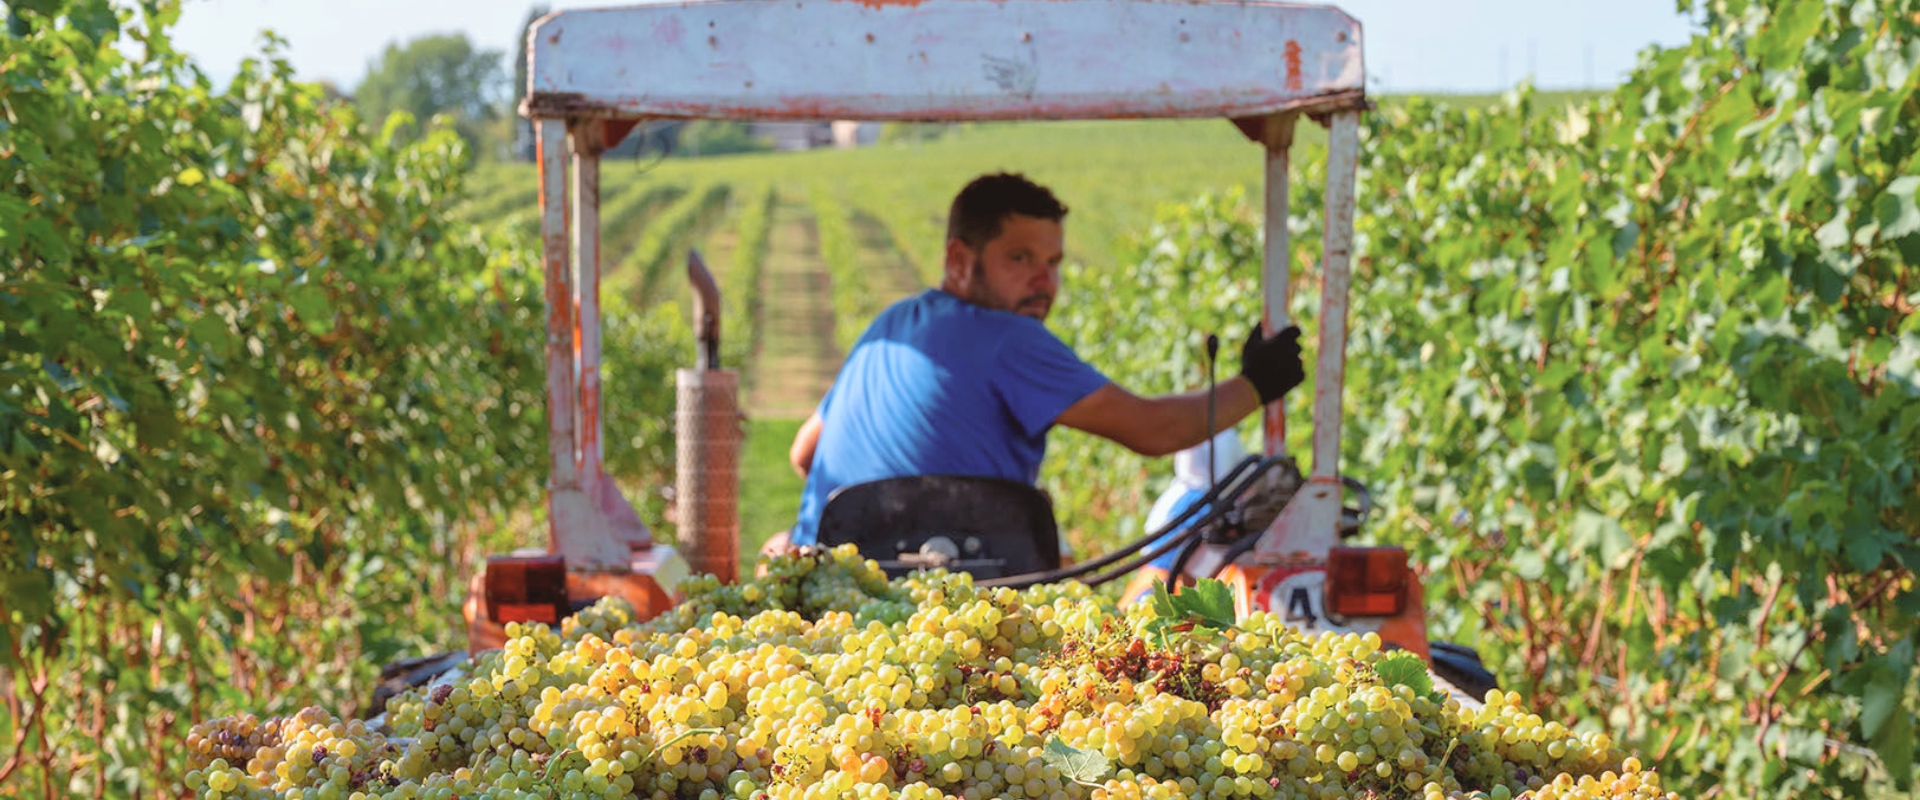 tractor harvesting grapes for organic wine